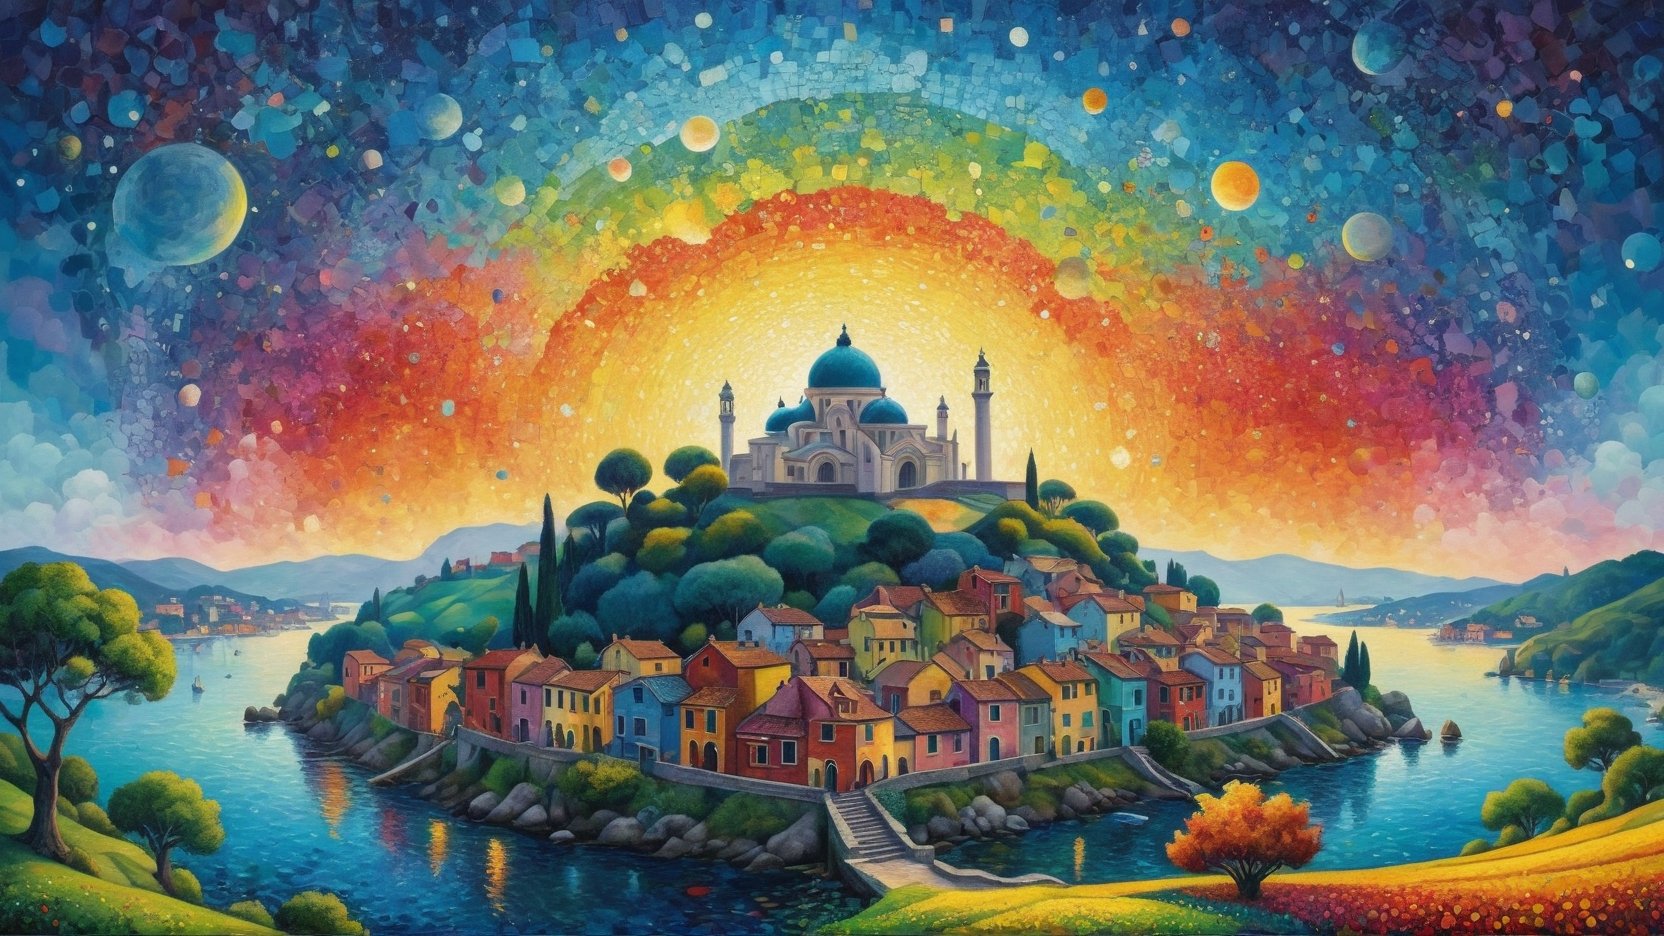 oil painting concept art, vibrant color, 

(The Southern Star Atlas:1.5), (Teppei Sasakura style:1.5),  (Pointillism:1.3), (papercutting:1.2), cutout picture, (HDR:1.4), high contrast, 

rainbow, sunshine, Create a whimsical and vibrant townscape with colorful, colorful flower field in front of fantastical houses, Venice is a city on water, The color palette include vibrant warm colors with contrasting highlights and shadows to give depth, The brushwork is rough with clean lines for the buildings and more fluid strokes for the sky and water reflections, The overall art style evoke elements of surrealism mixed with folk art, Draw inspiration from artists like Marc Chagall for dreamlike scenes and Joan Miró for bold colors and shapes,

a image for a póster of psytrance festival, contains fractals, spiritual composition, the imagen evoke happiness and energy. the imagen contains organic textures and surreal composition. some parts of the image evoke a las trip,